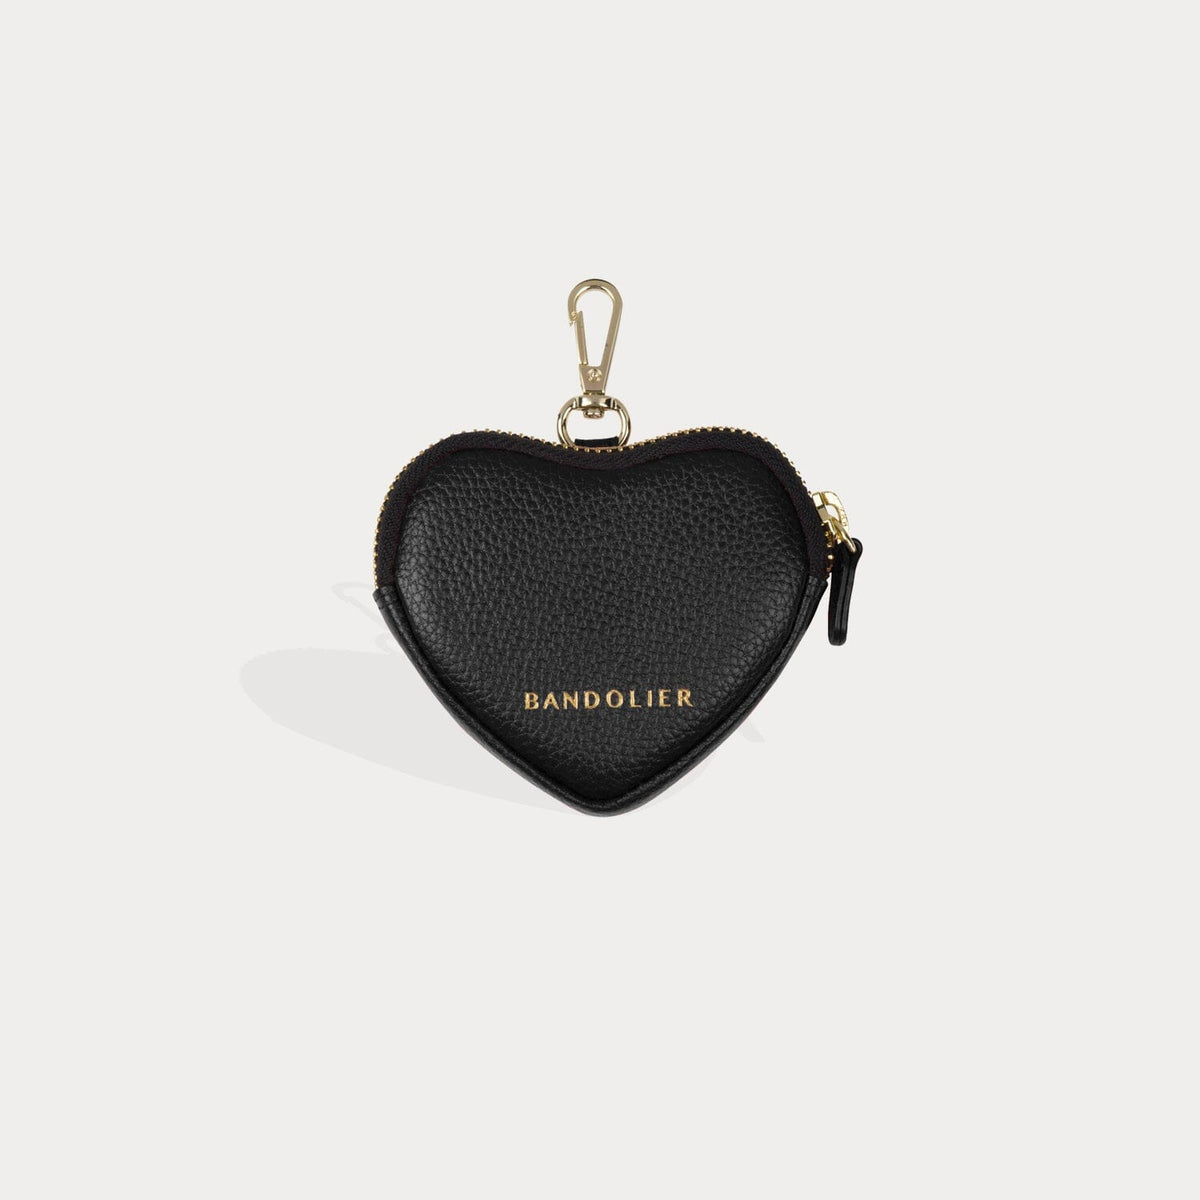 Leather Coin Purse with Heart